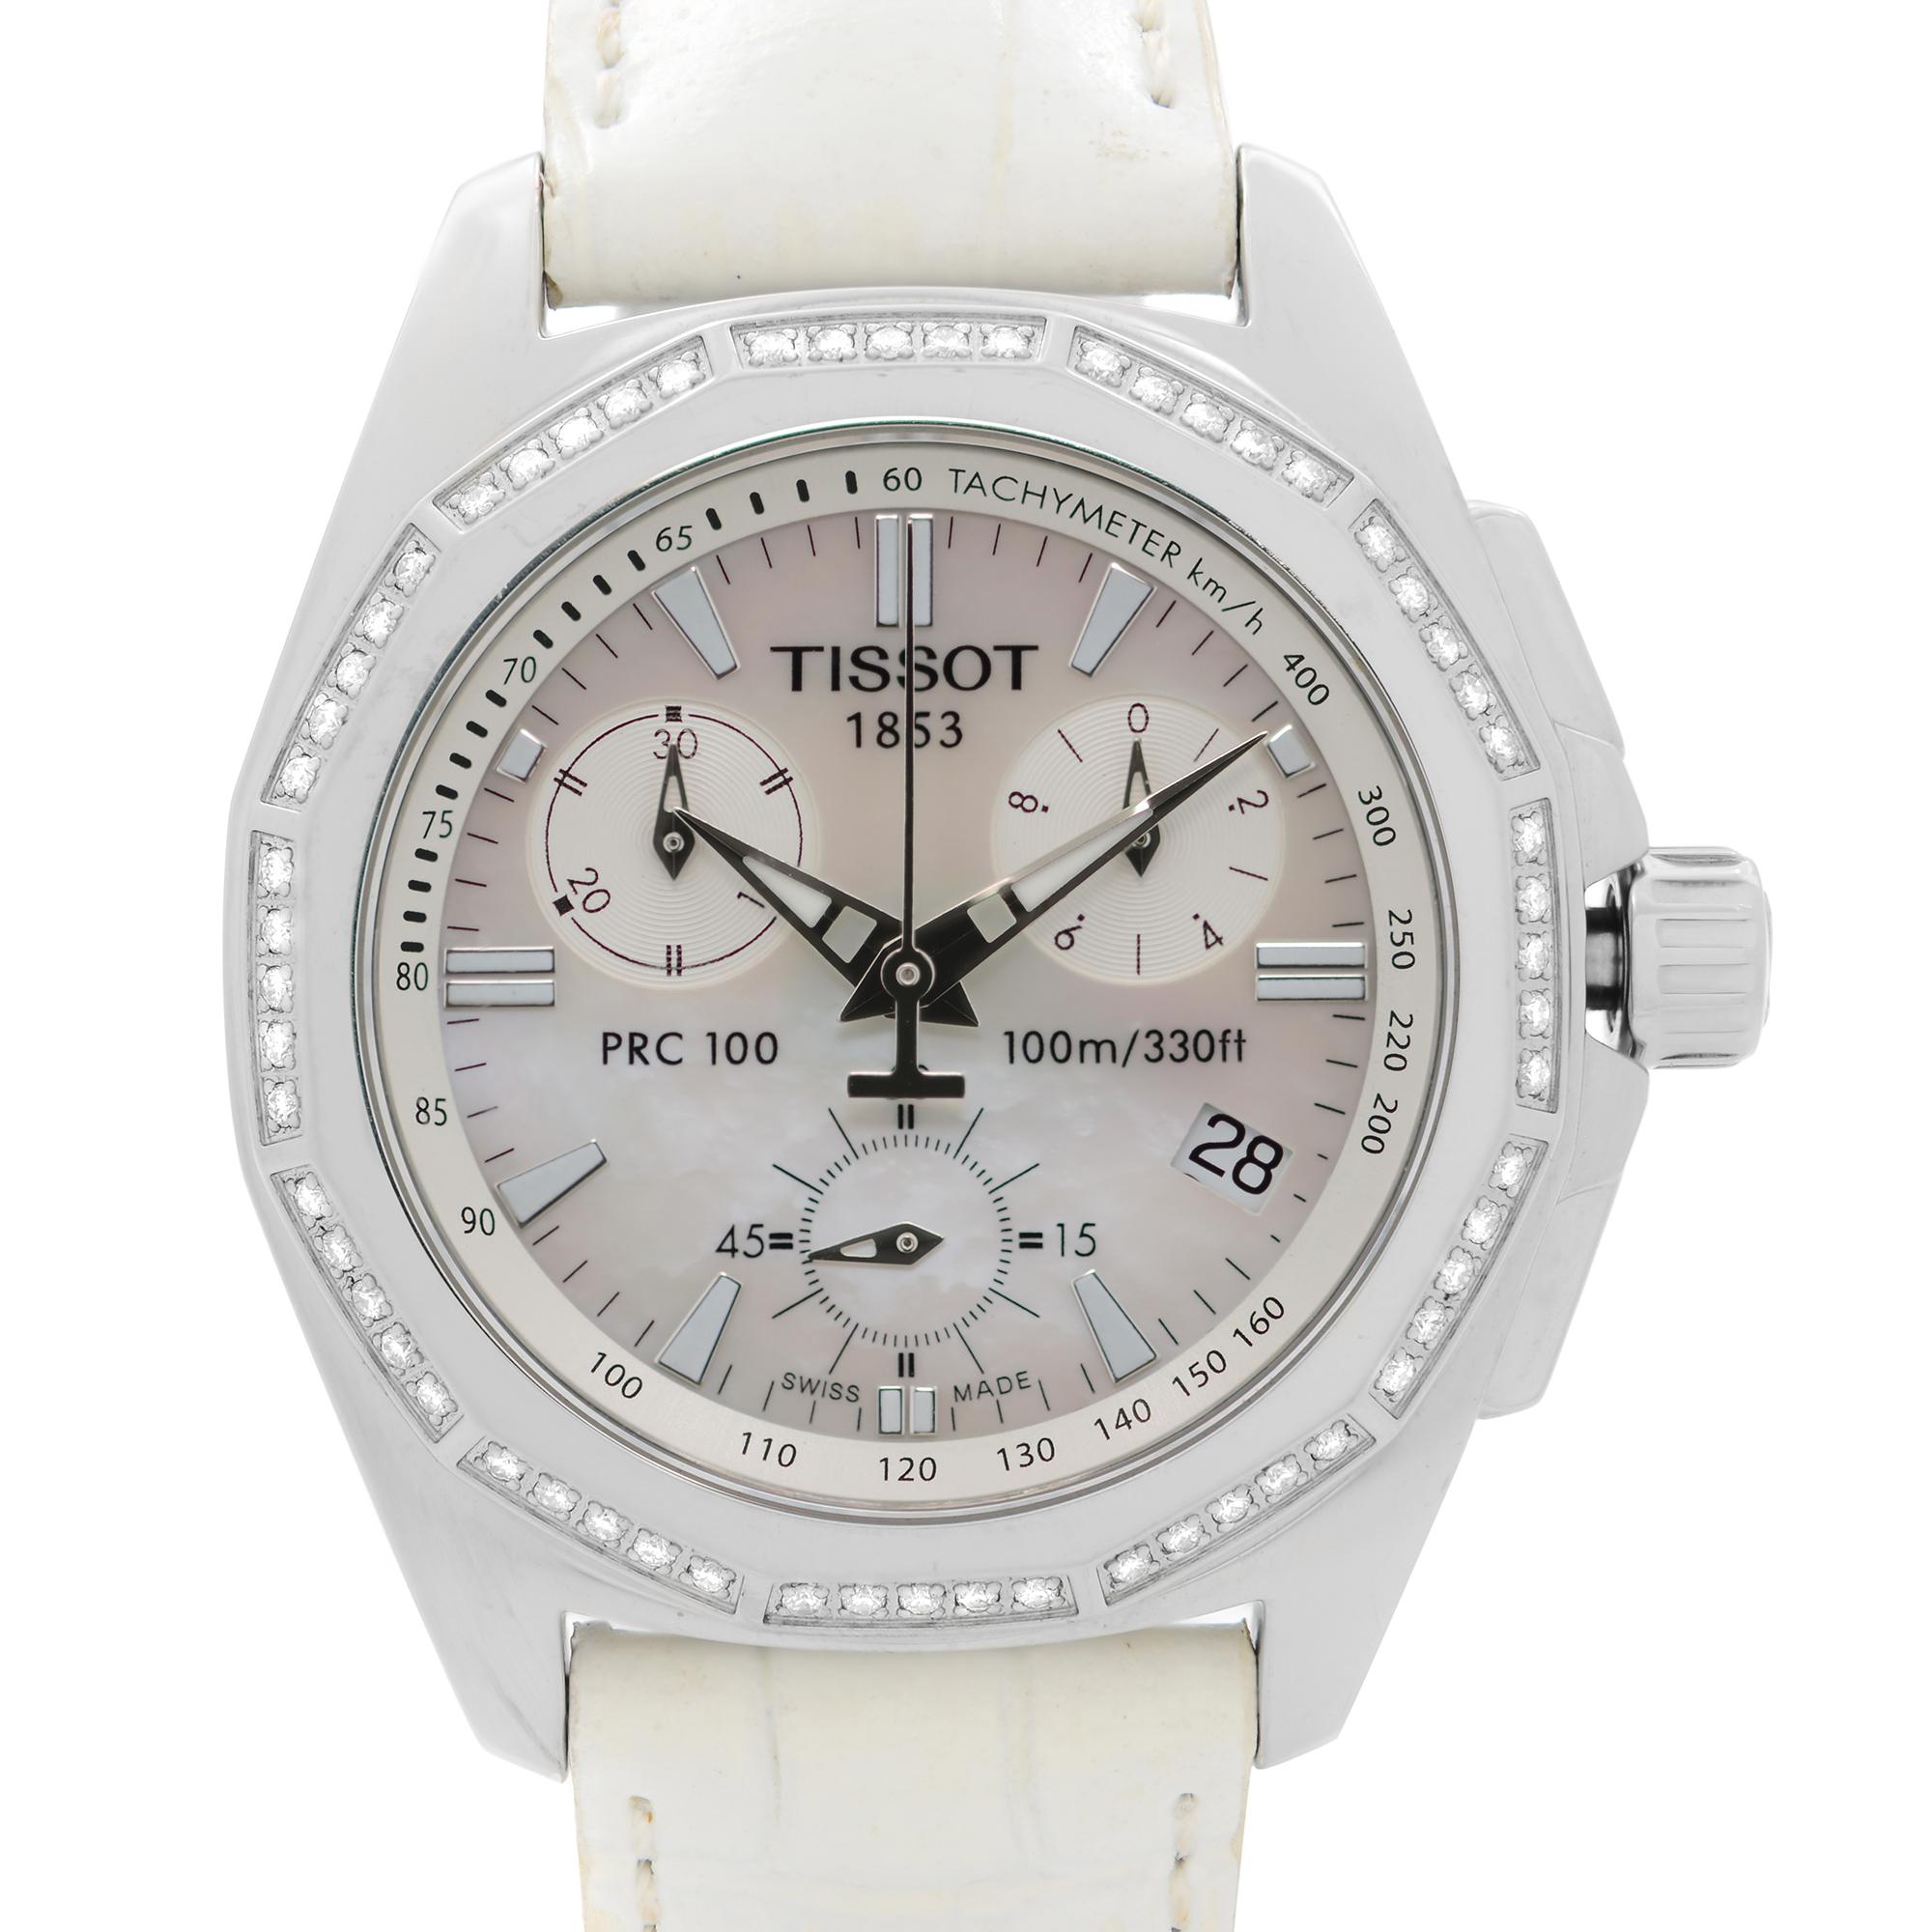 Pre-owned Tissot PRC 100 T22.1.456.21. The band has signs of wear and little cracks on inner side. This Beautiful Timepiece is Powered by Quartz (Battery) Movement and Features: Rounds Stainless Steel Case with a White Leather Strap, Fixed Stainless